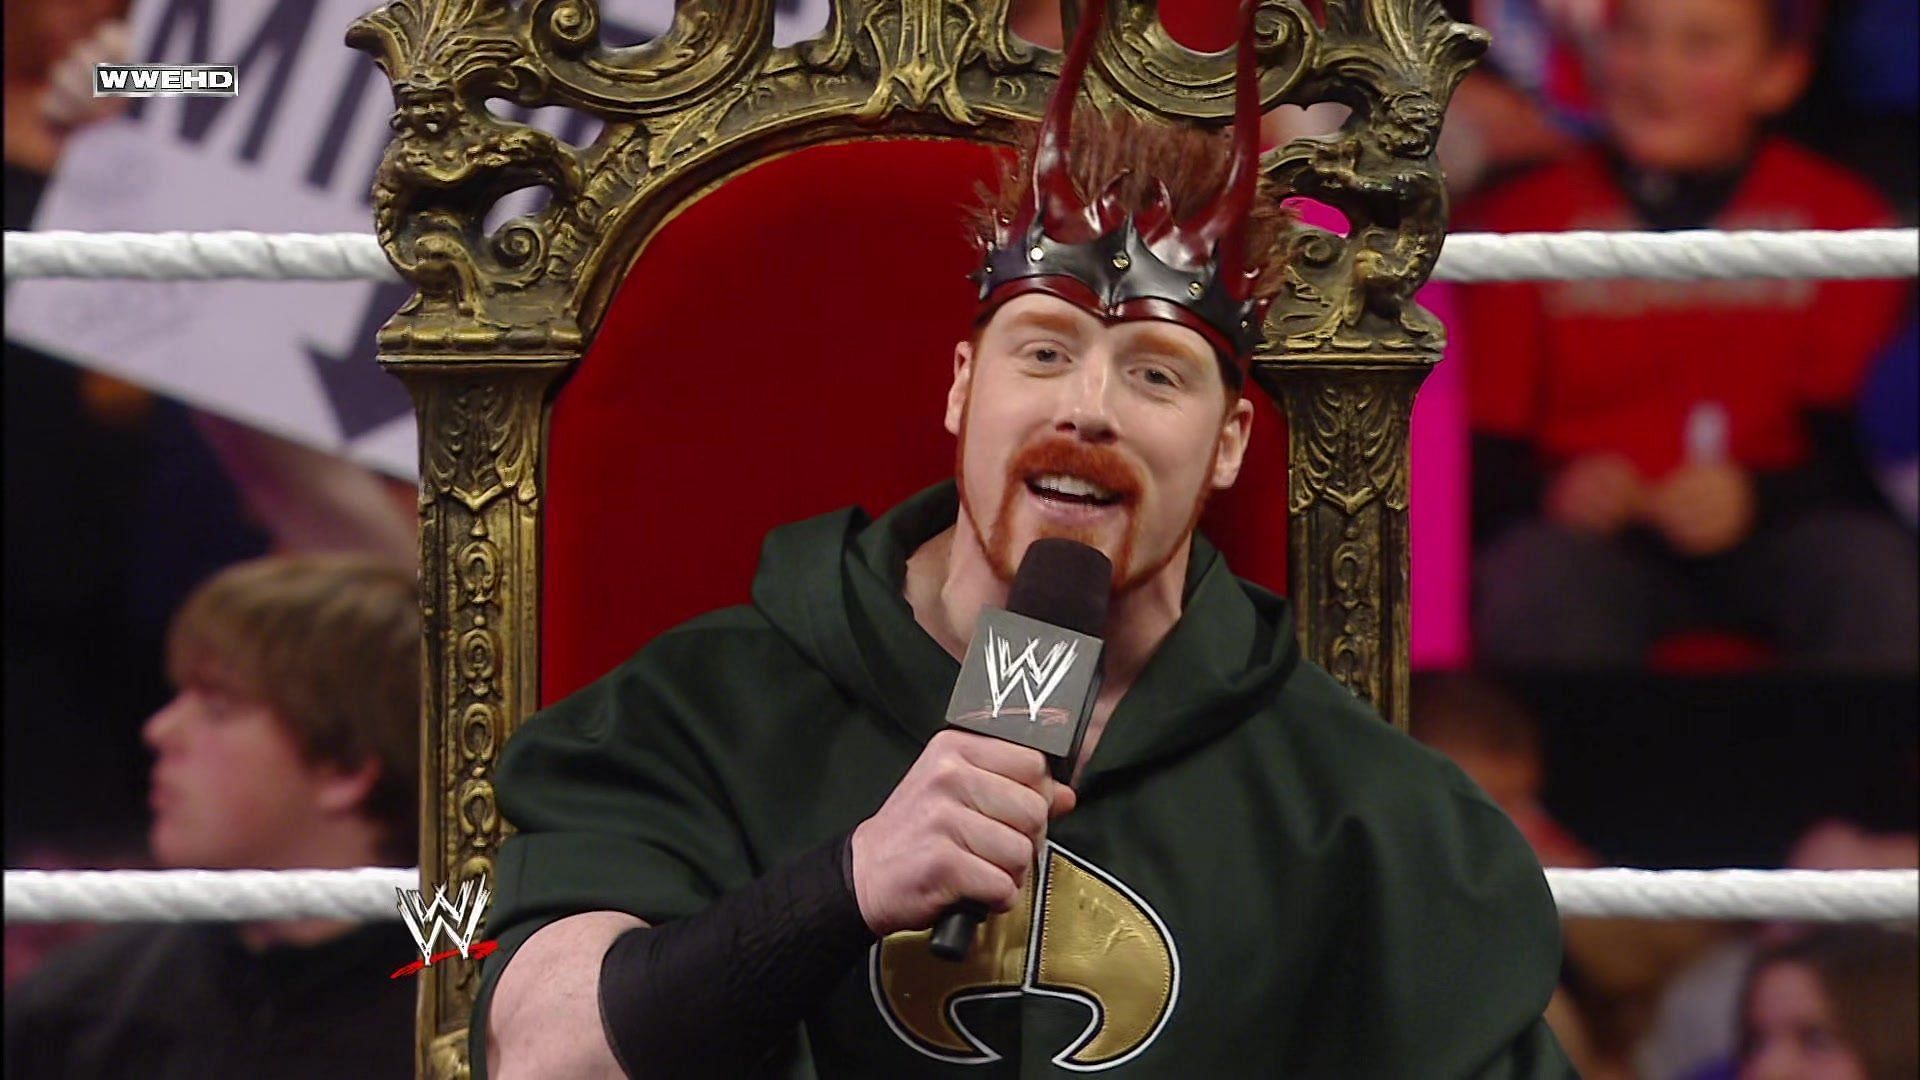 Sheamus as King of the Ring